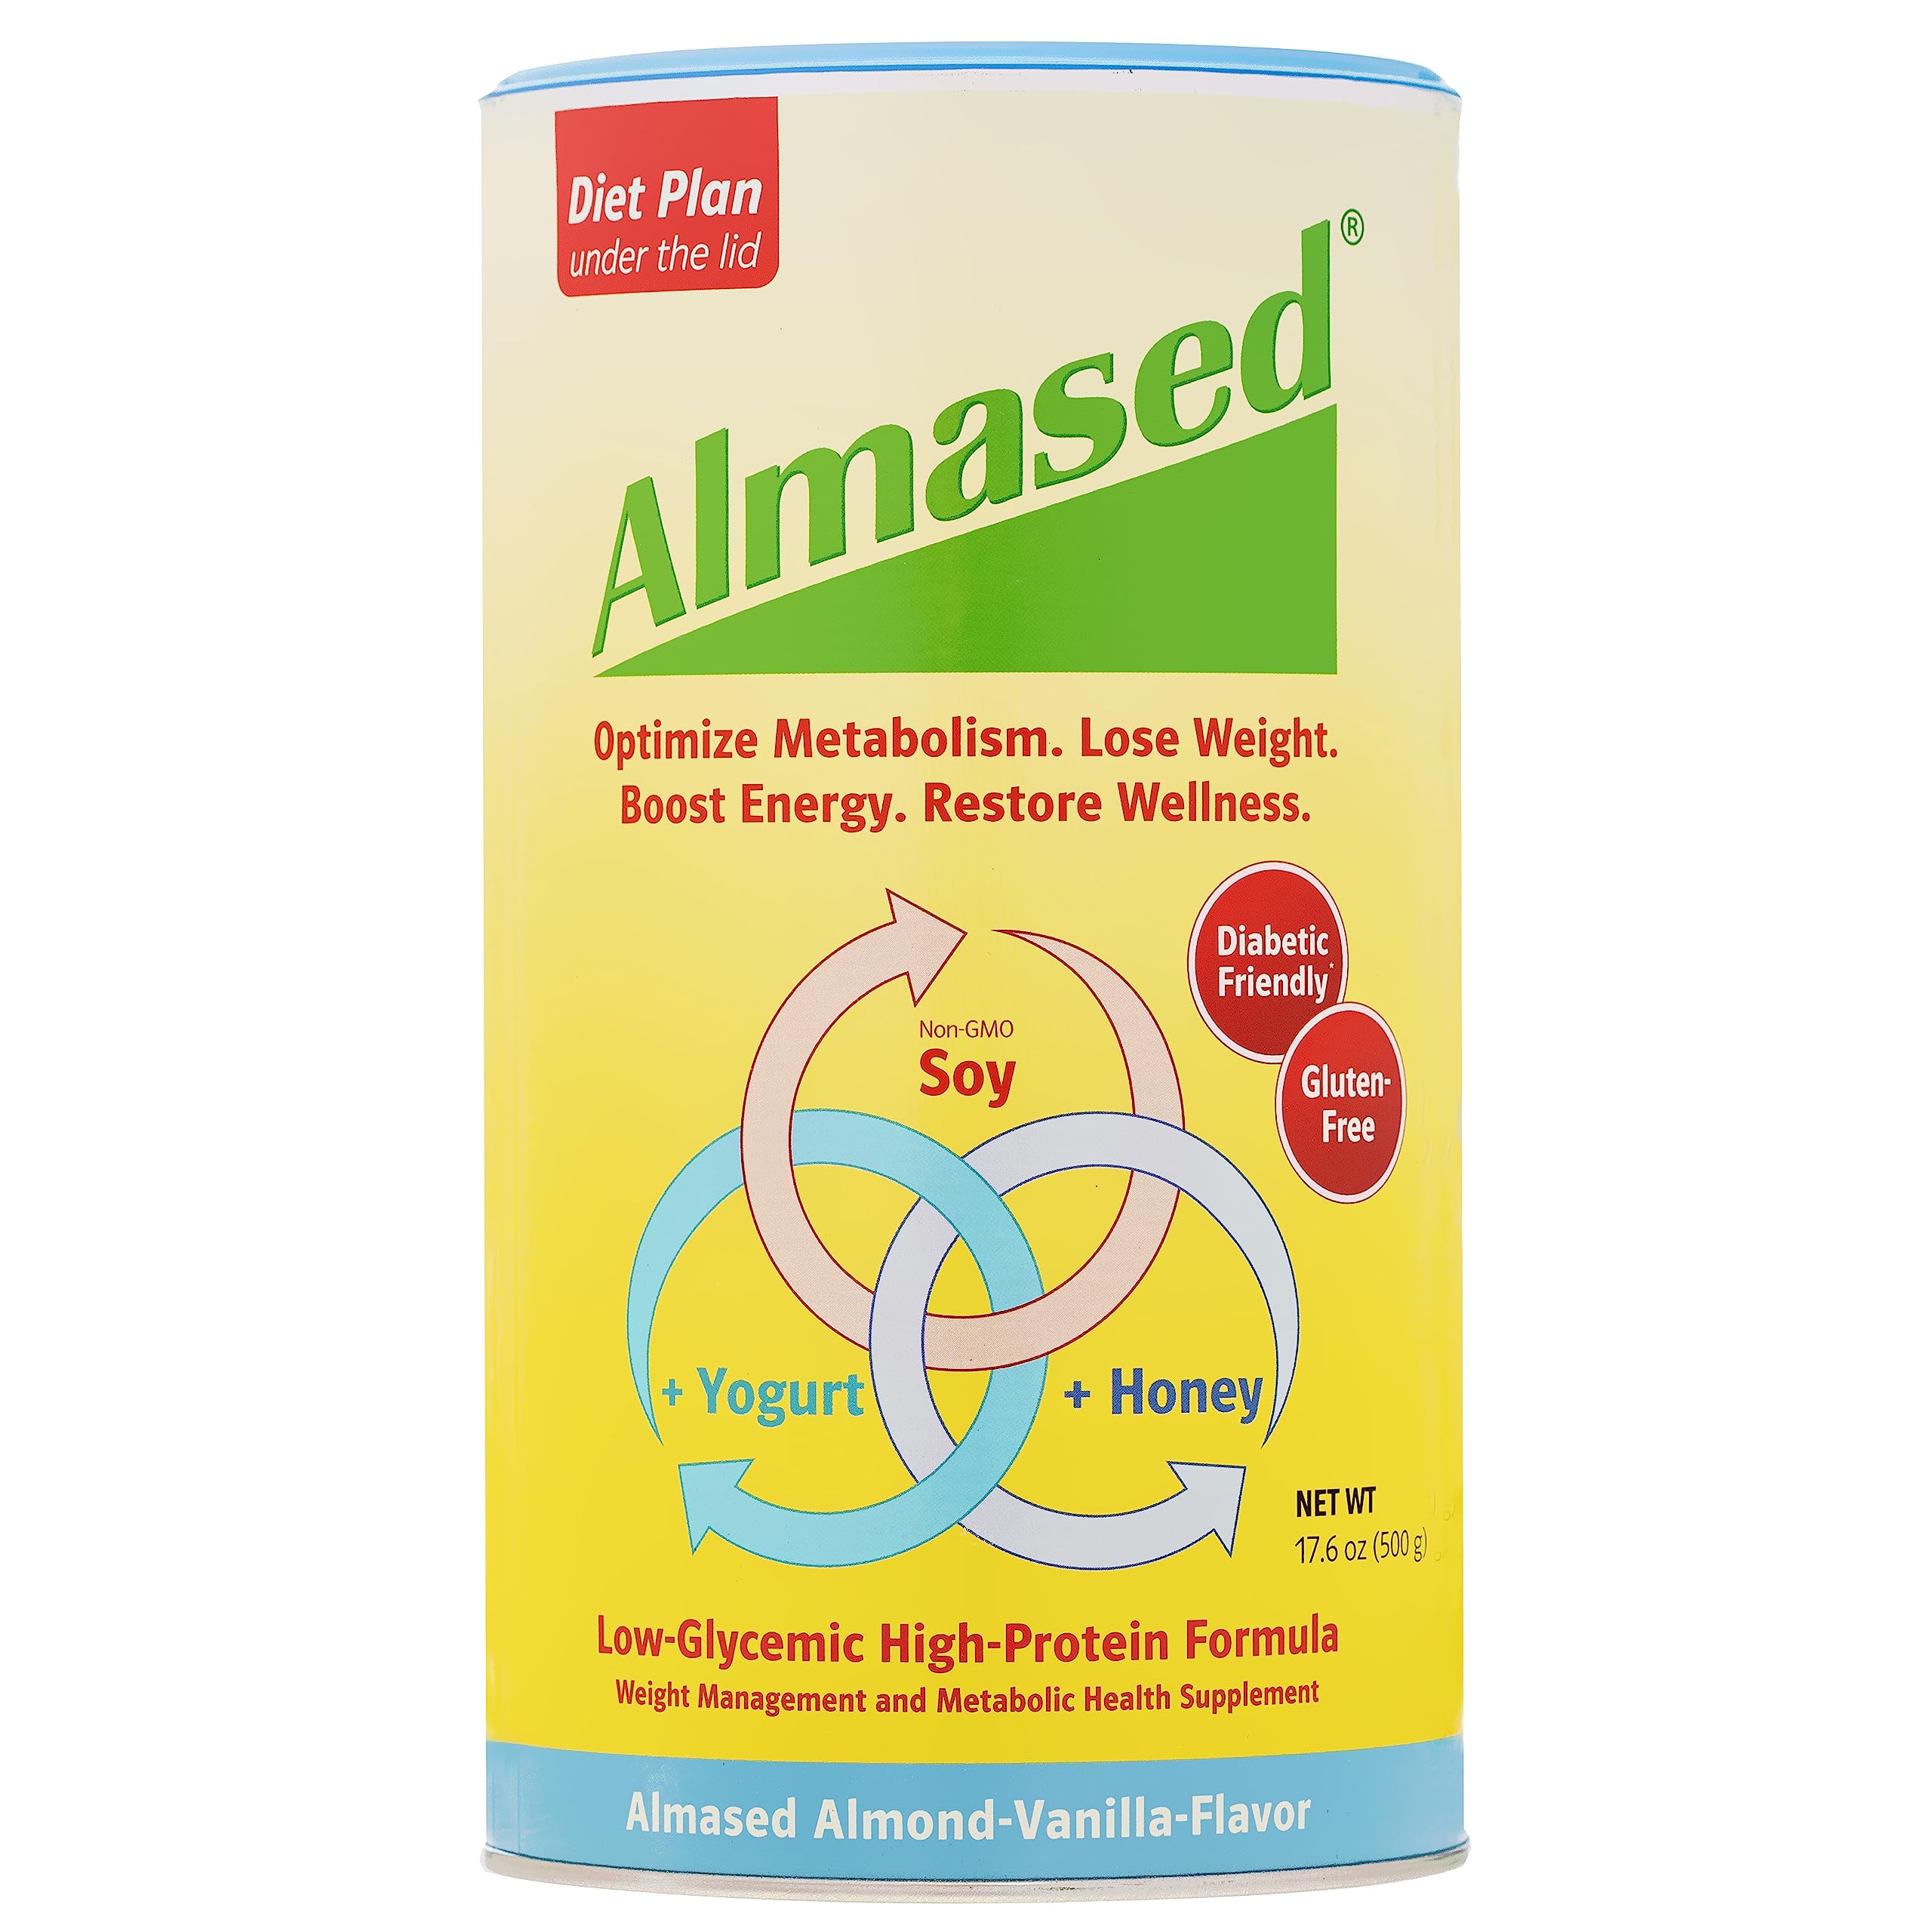 Almased Vanilla Meal Replacement Shake - Low-Glycemic High Plant Base Protein Powder- Nutritional Weight Health Support Supplement - Vanilla Flavor - 17.6 oz (1.1 Pound (3 Pack))